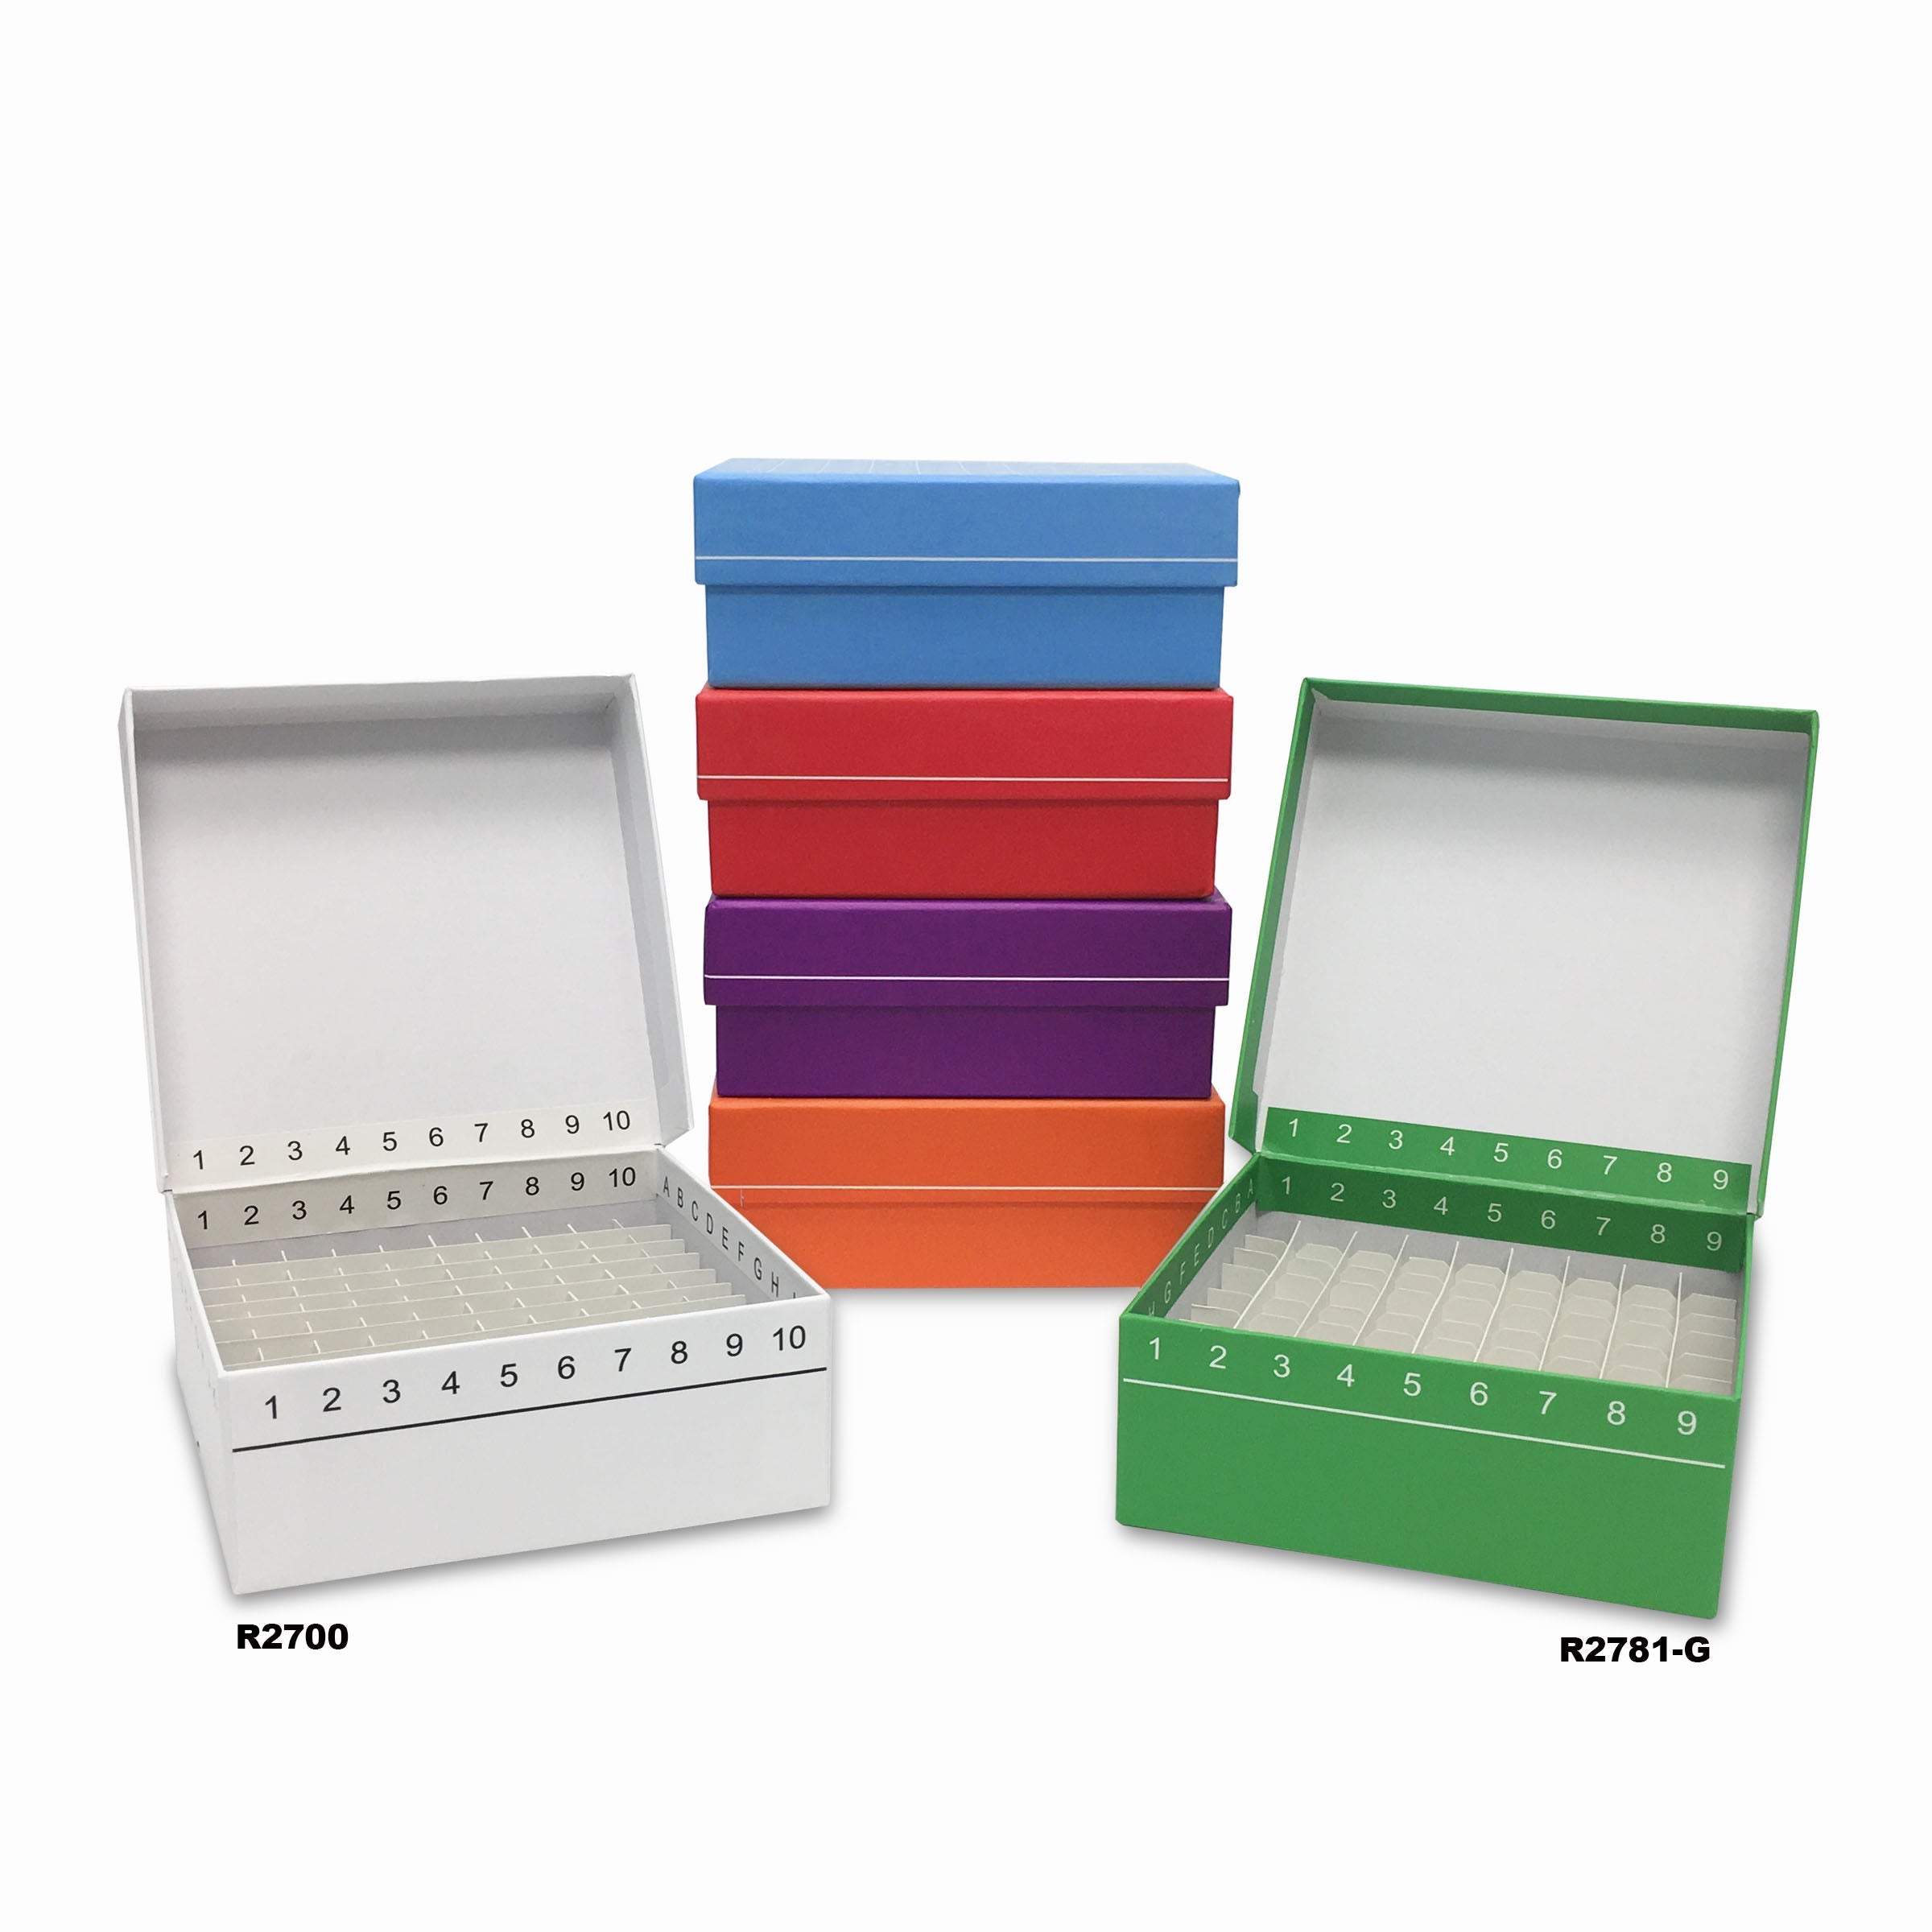 MTC Bio R2700-G, Fliptop Carboard Freezer Box with Attached Hinged Lid, 100-Place, Green, 5/pk